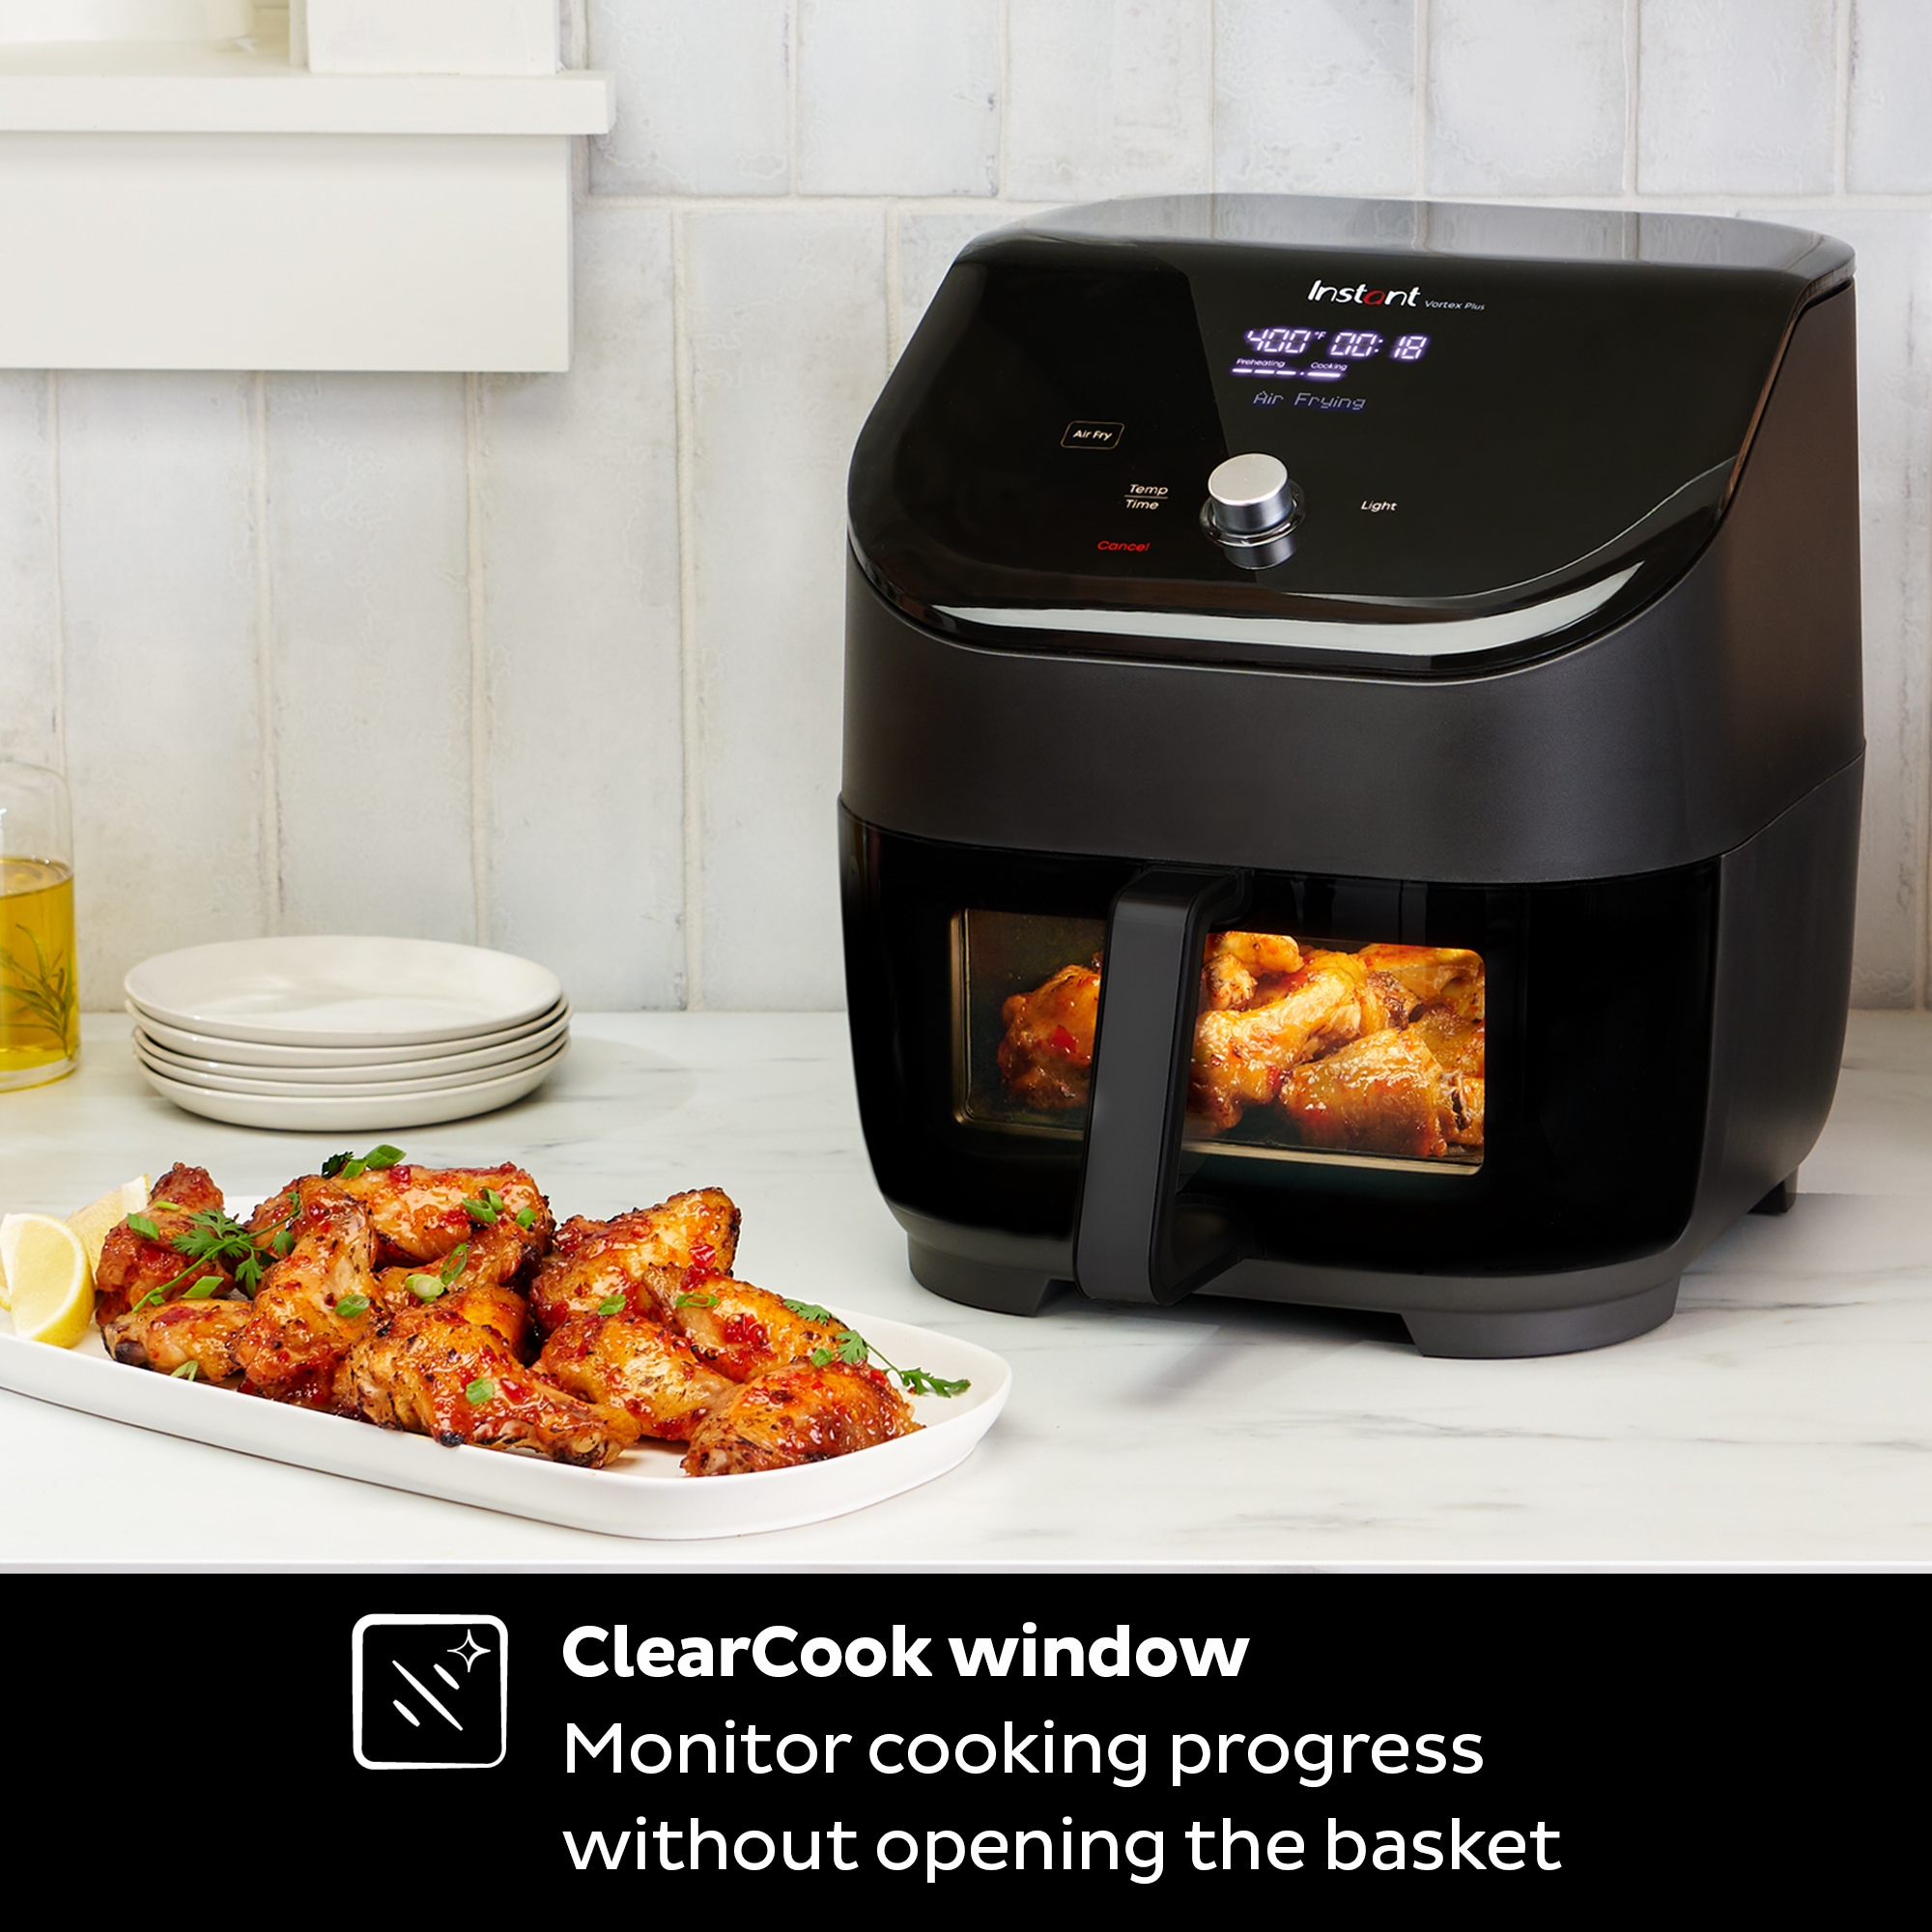 Air Fryer Oven 7 in 1 with Rotisserie, 10 Qt, EvenCrisp Technology